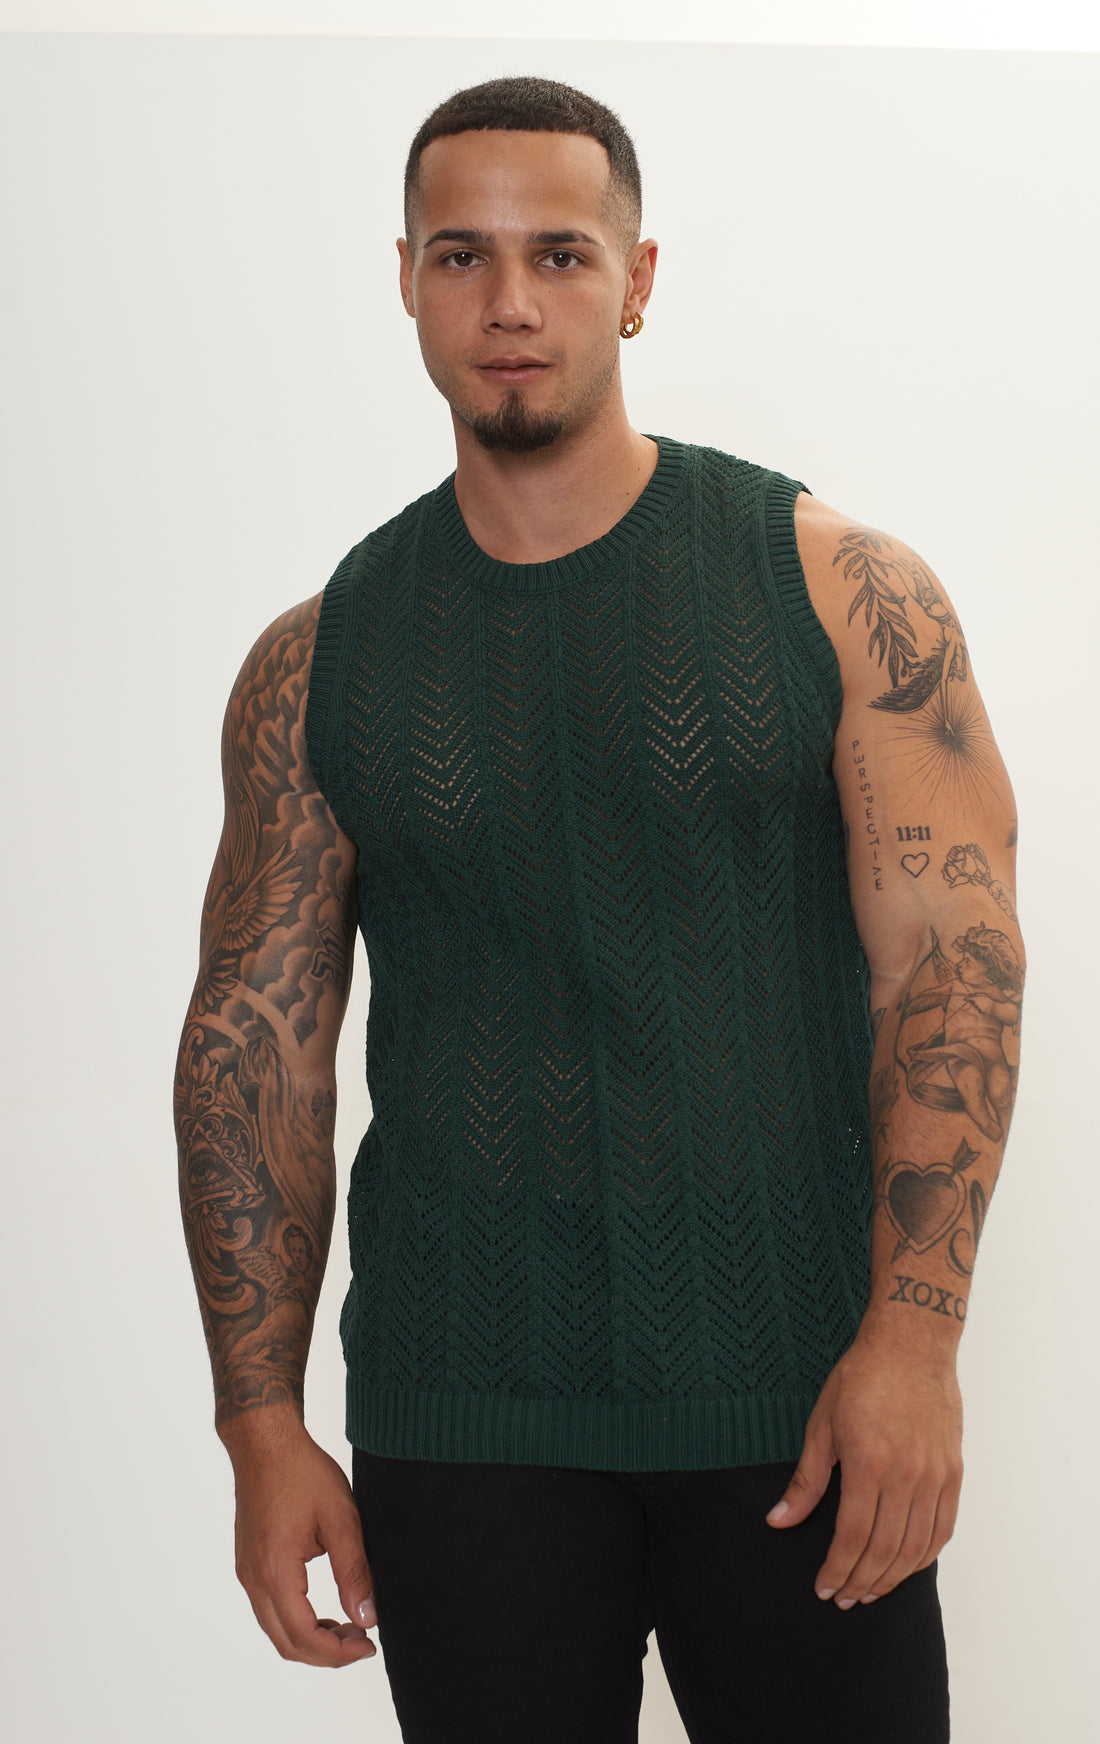 Muscle Fit Tank Top - Green